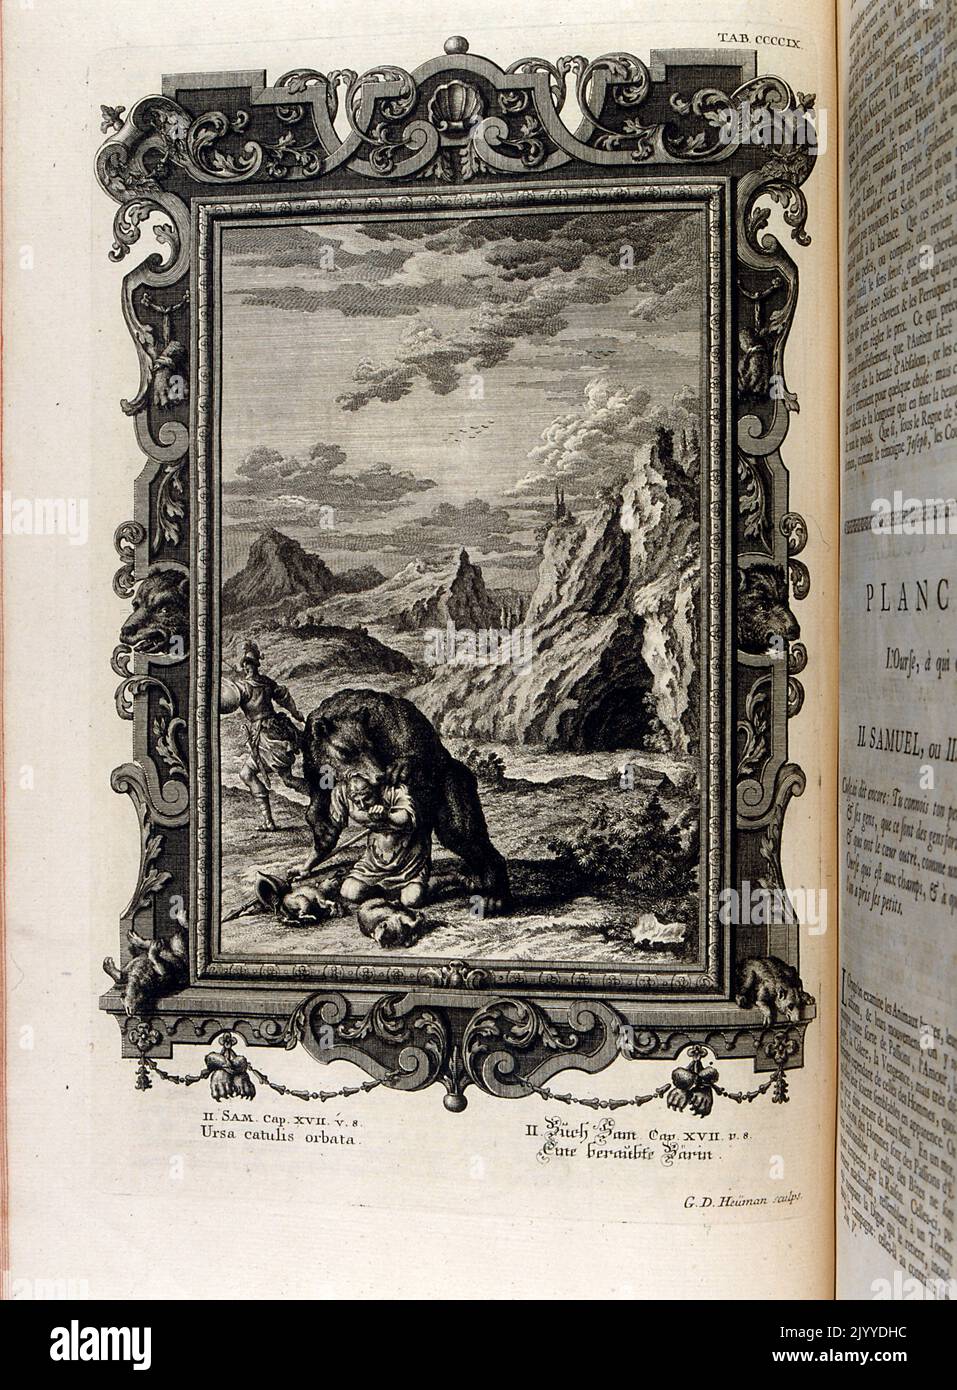 Engraving depicting a bear devouring a soldier in front of a rocky mountainous landscape. The Illustration is set within an ornate frame. Stock Photo